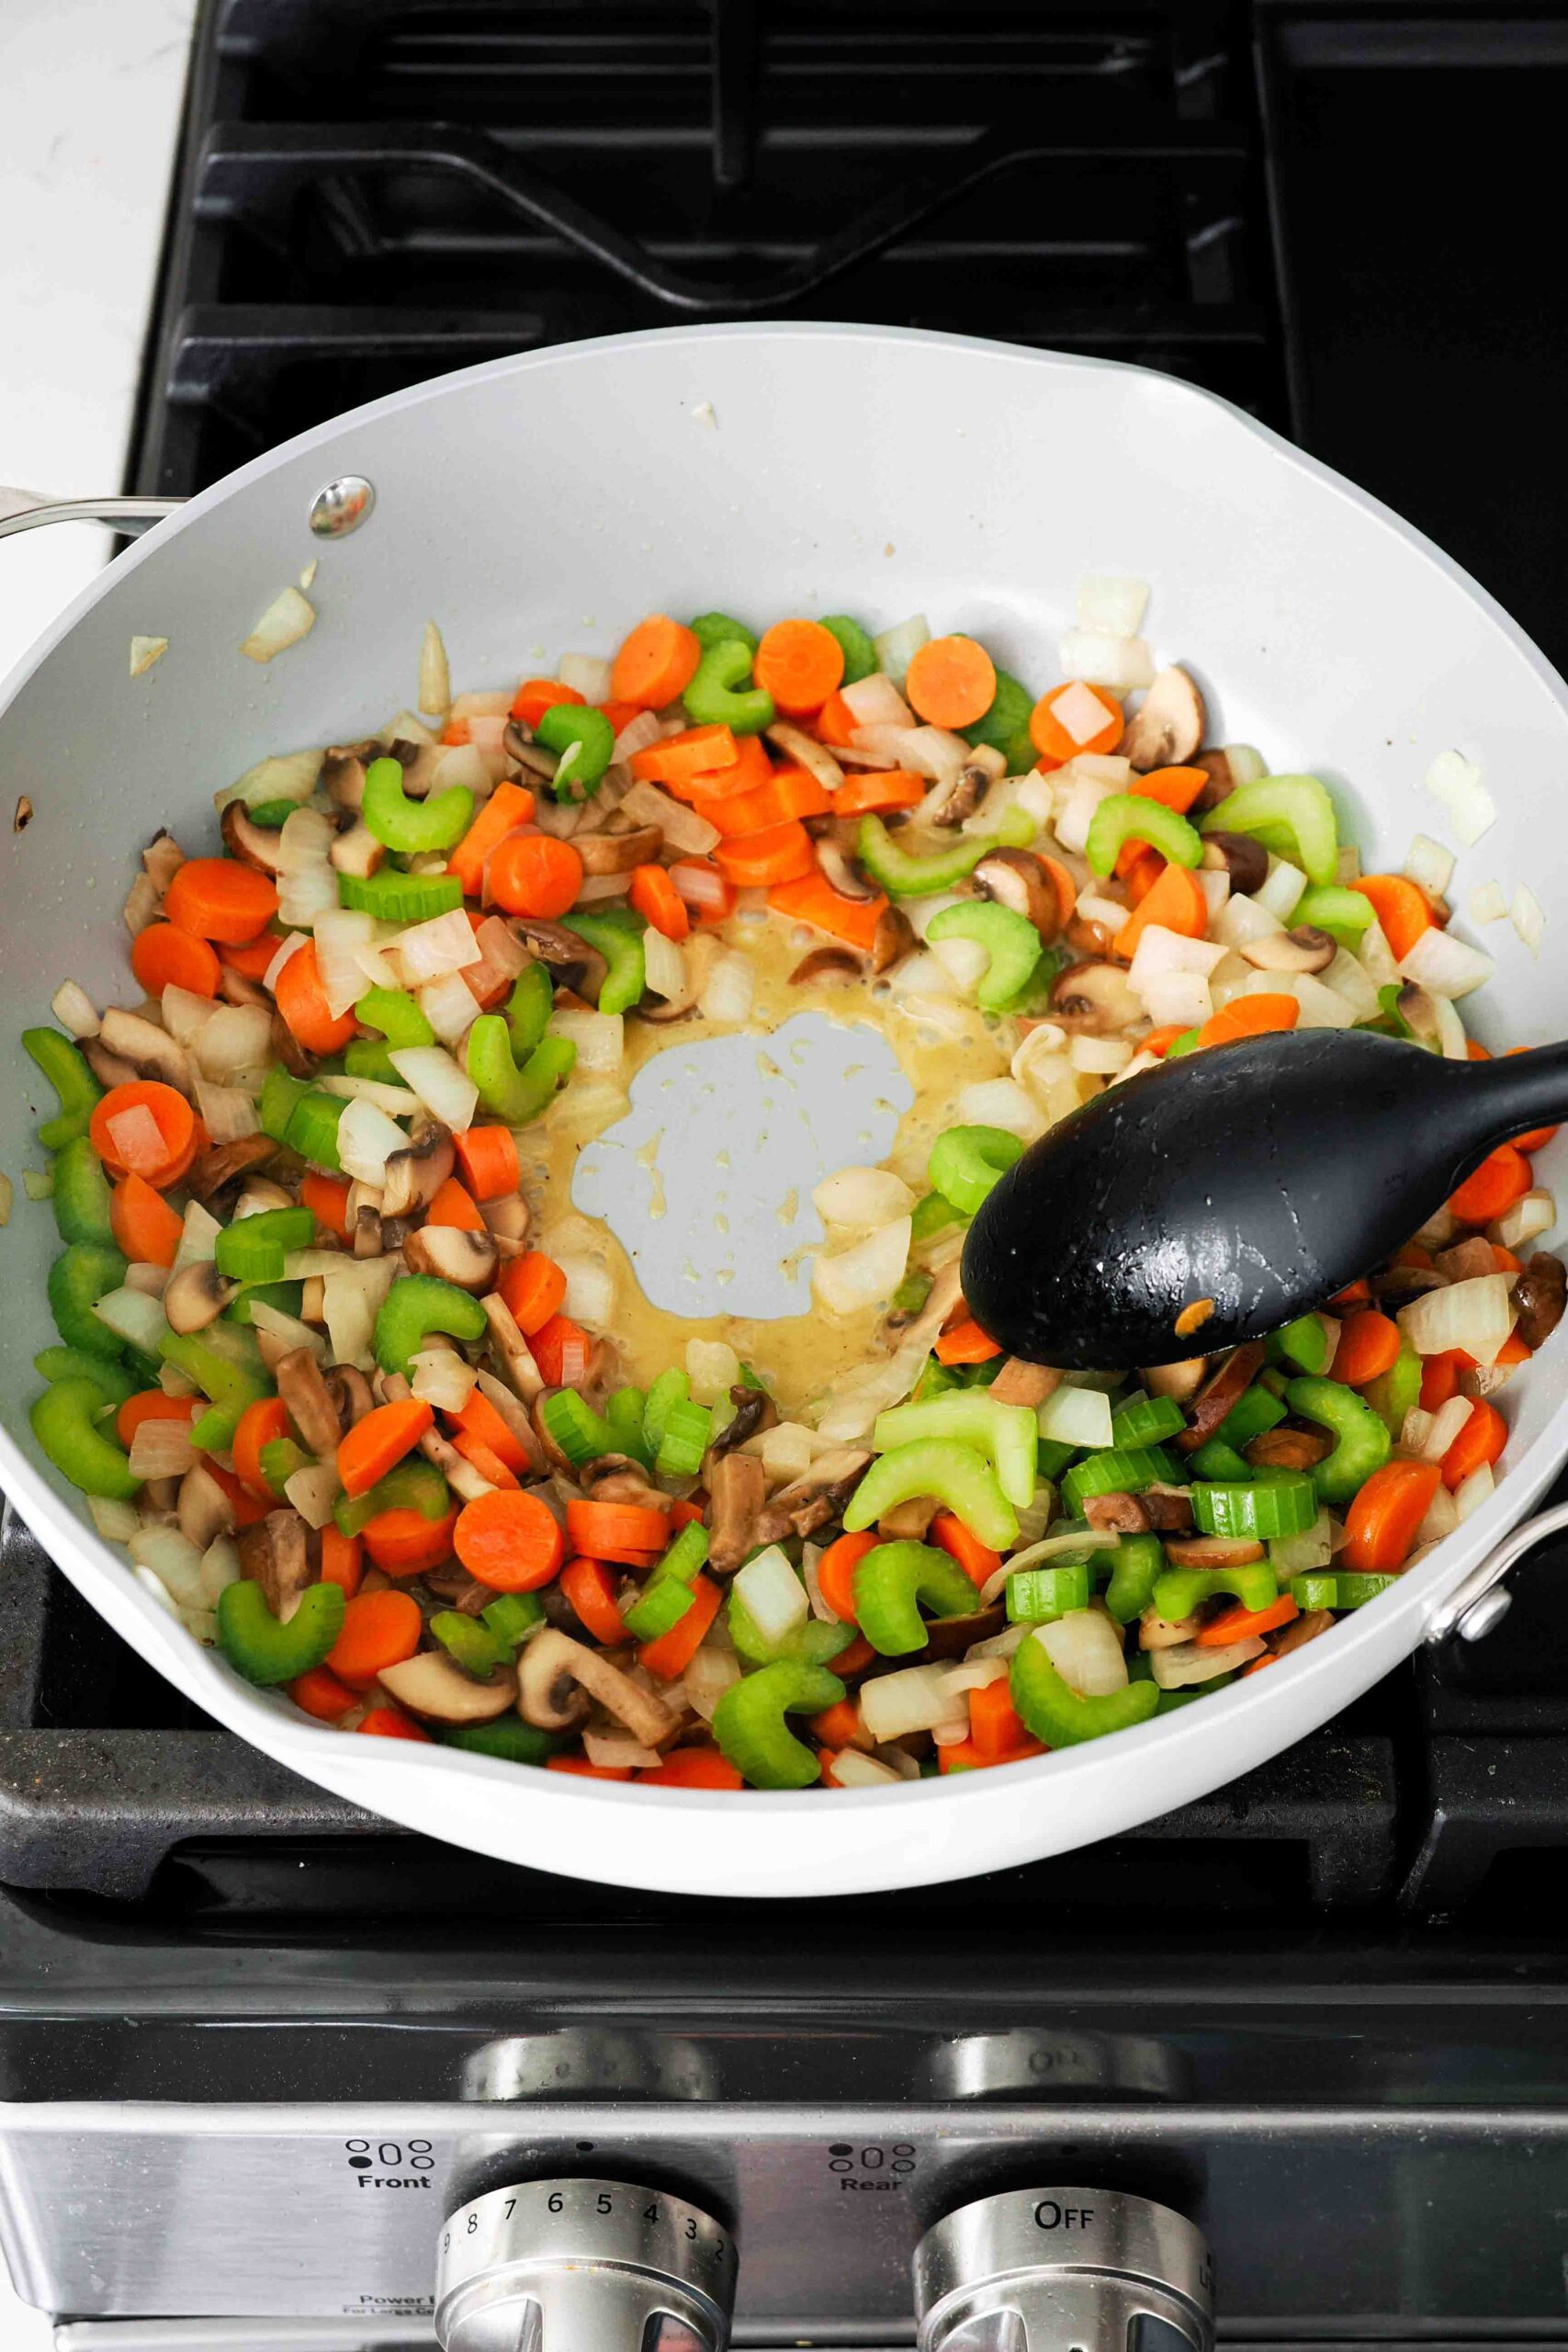 A spoon clears the center of a large pan with vegetables, and liquid seeps in.